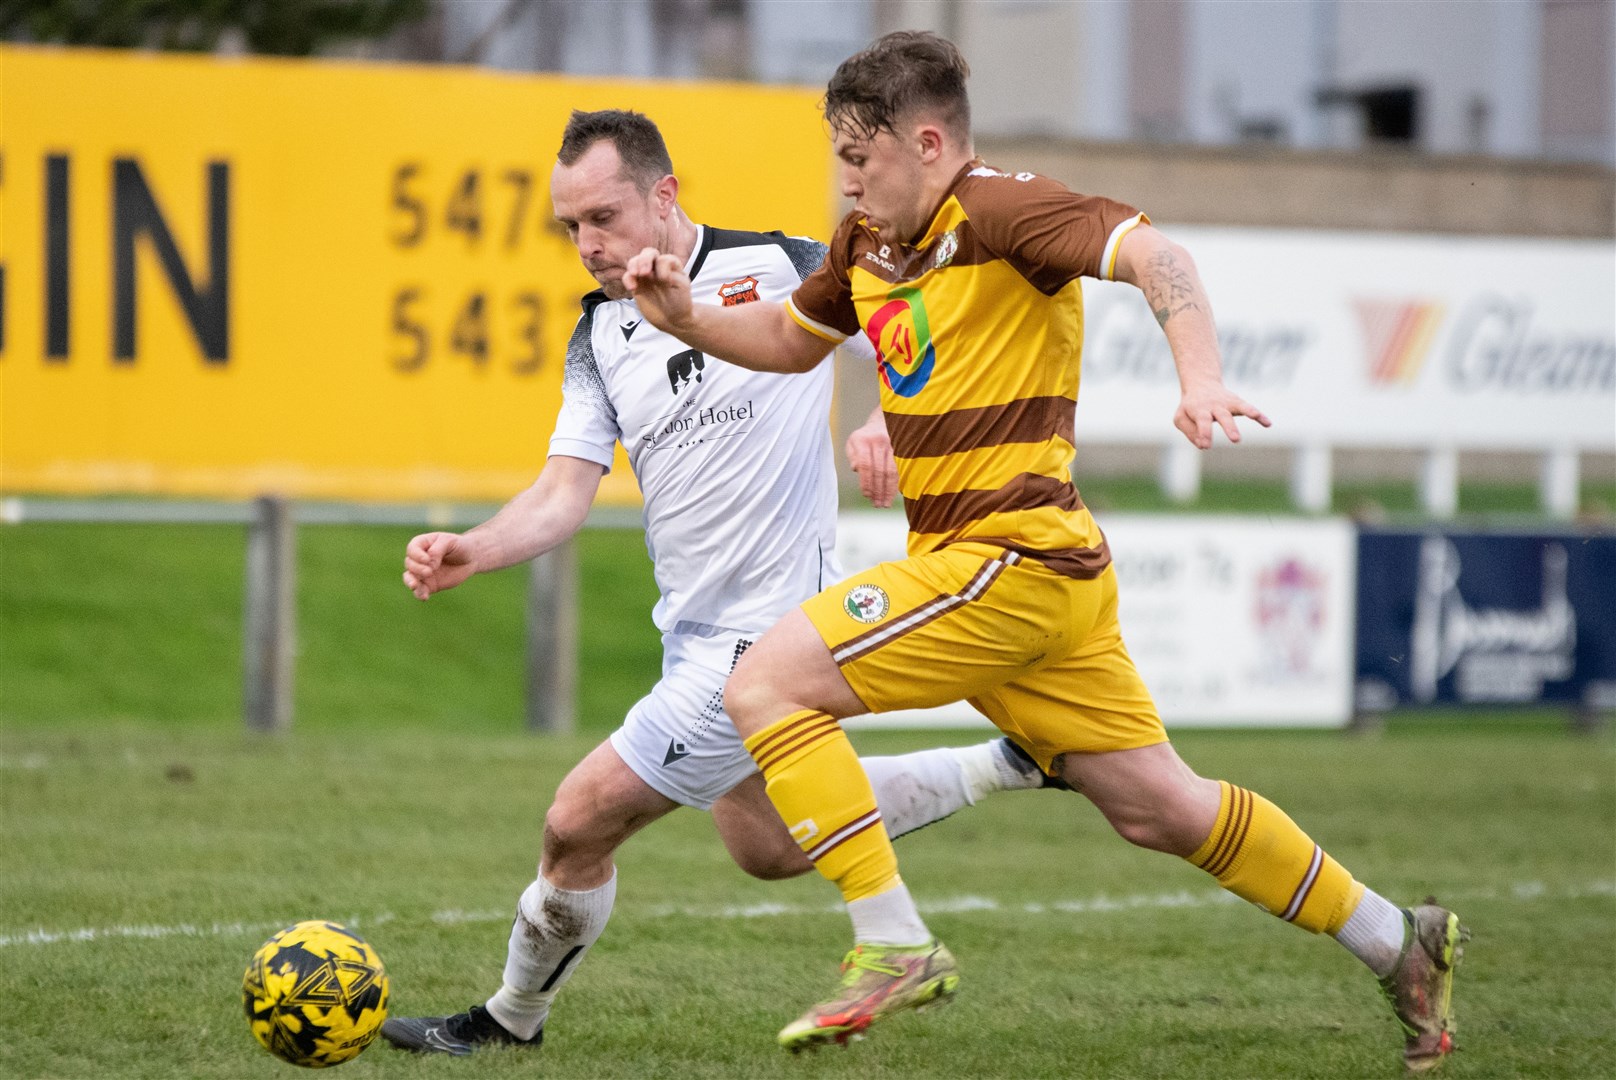 Forres forward Shaun Morrison and Rothes centre-back Charlie MacDonald scored the goals. Picture: Daniel Forsyth